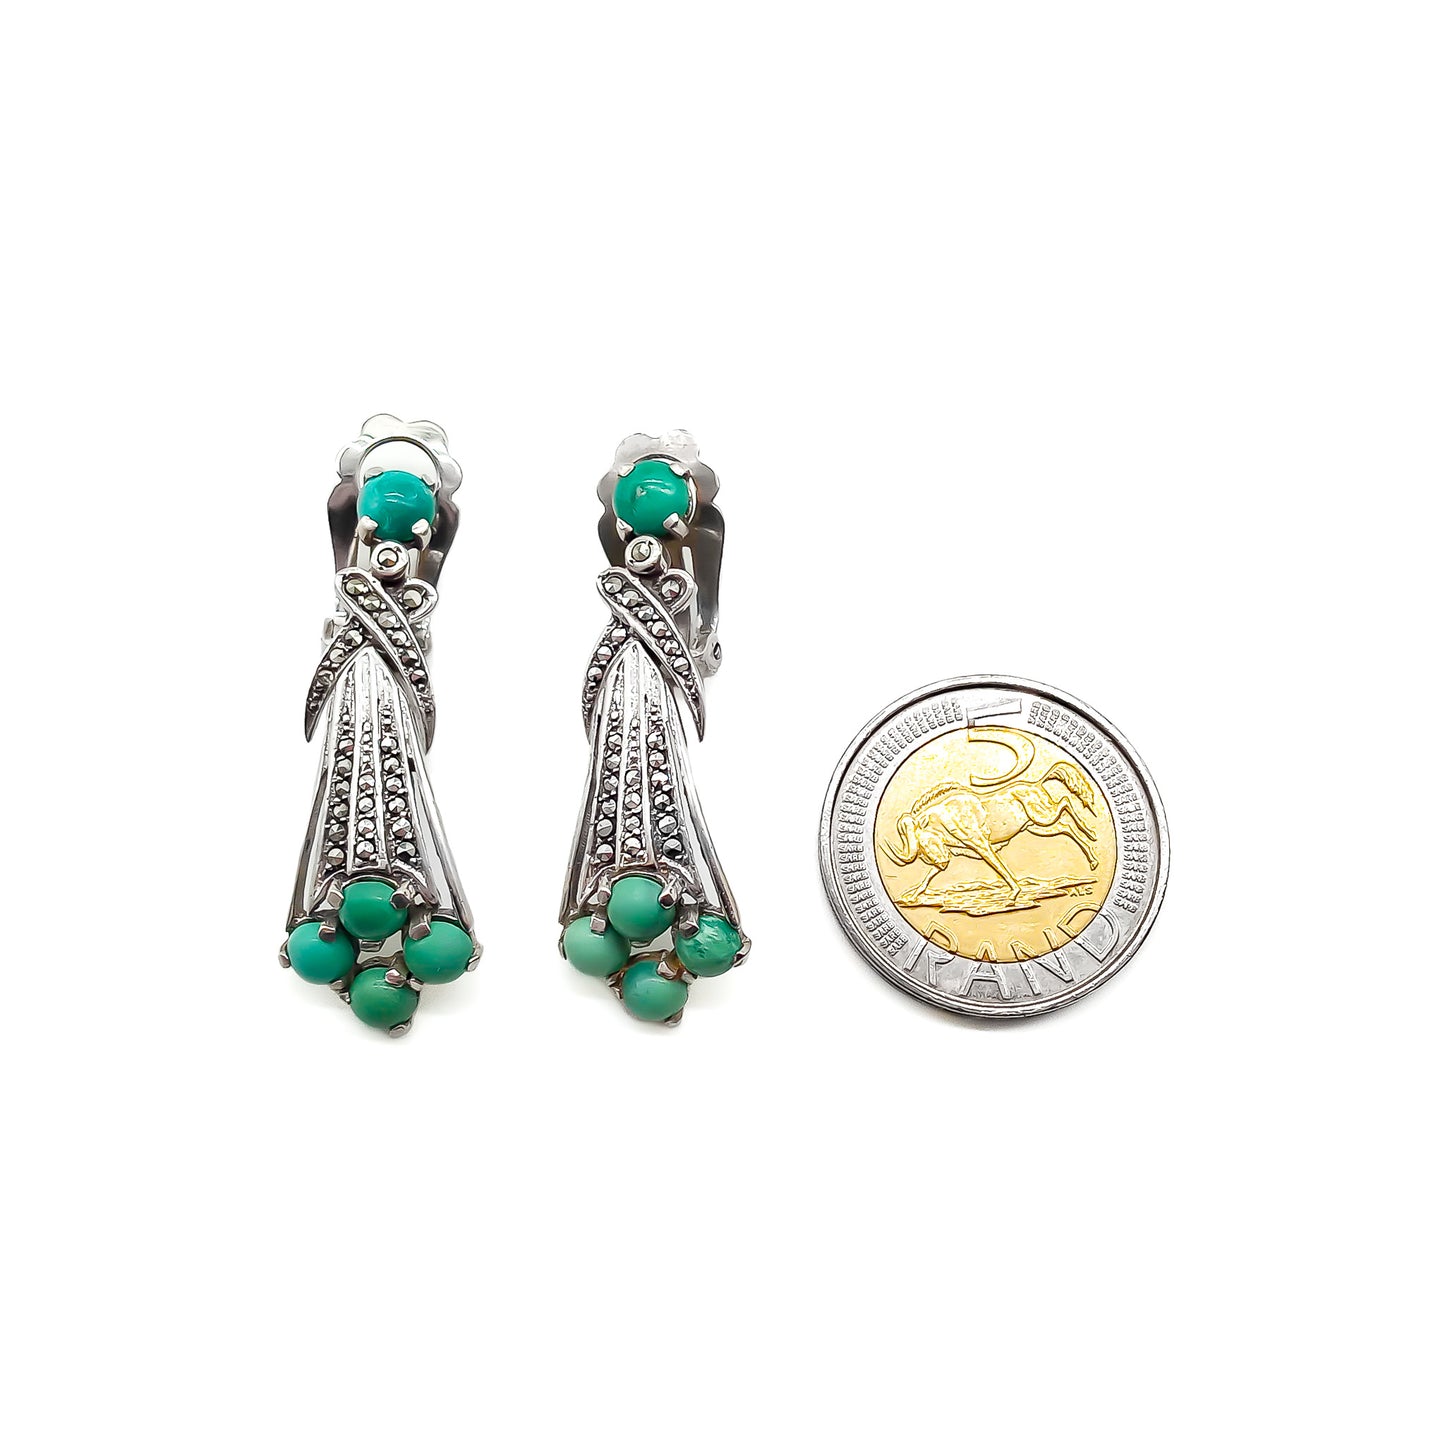 Glamorous Art Deco clip-on drop earrings set with cabochon turquoise stones and marcasites.  Circa 1930’s